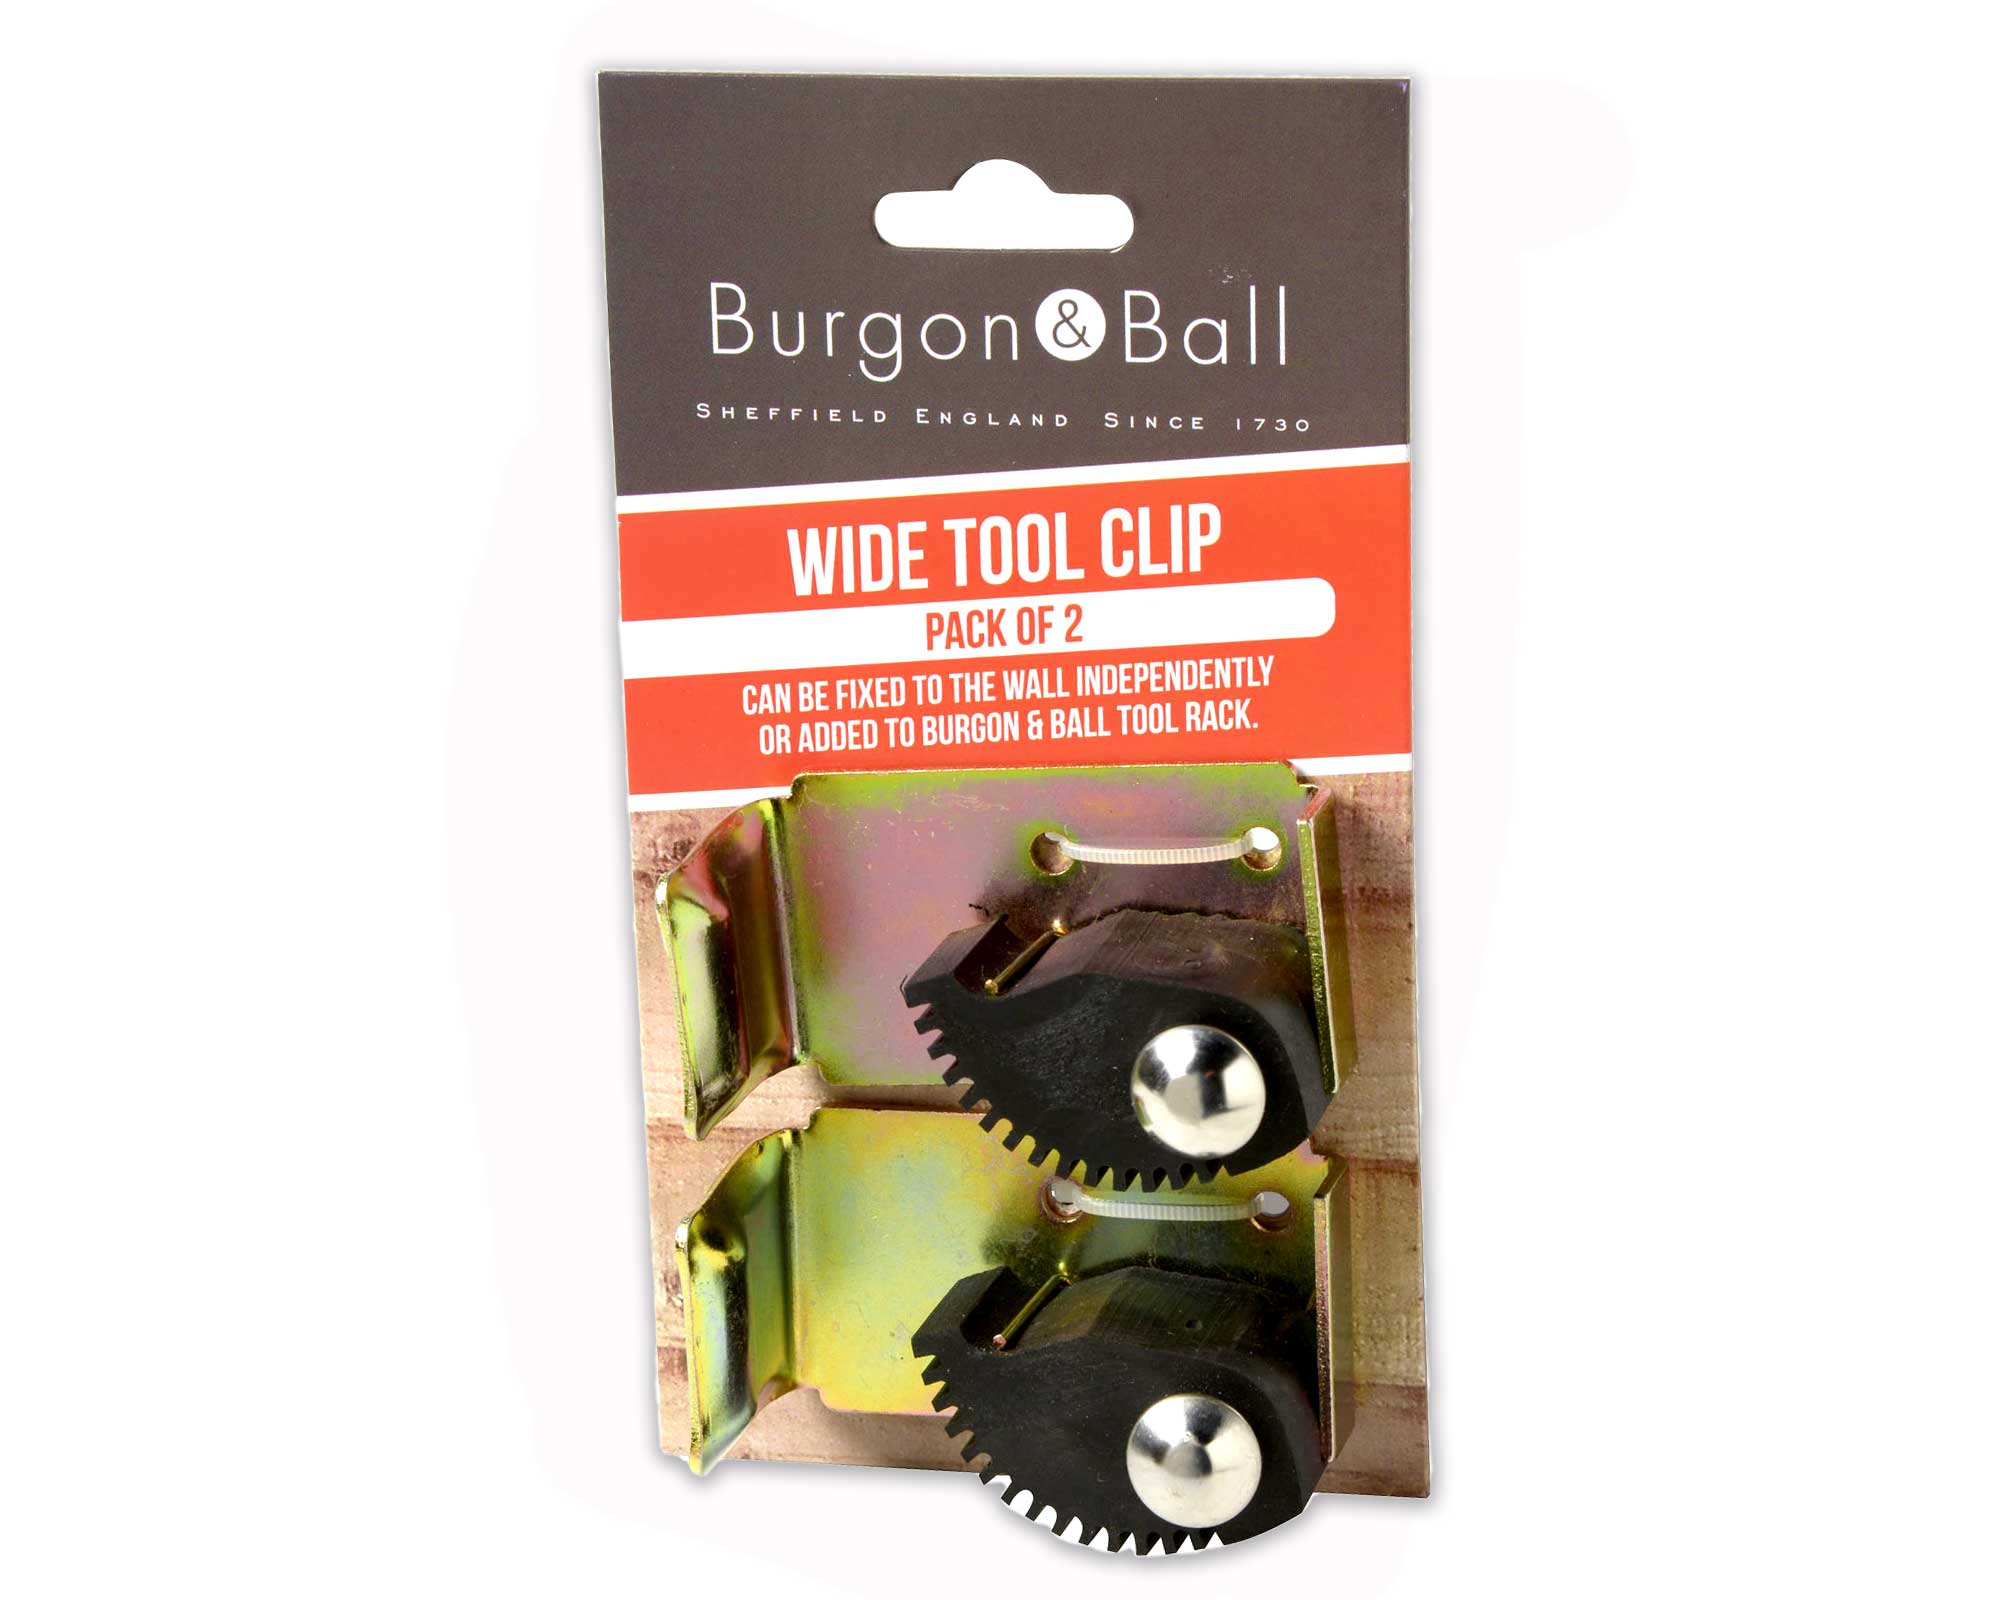 Additional wide Clips for the Burgon and Ball Universal Tool Rack